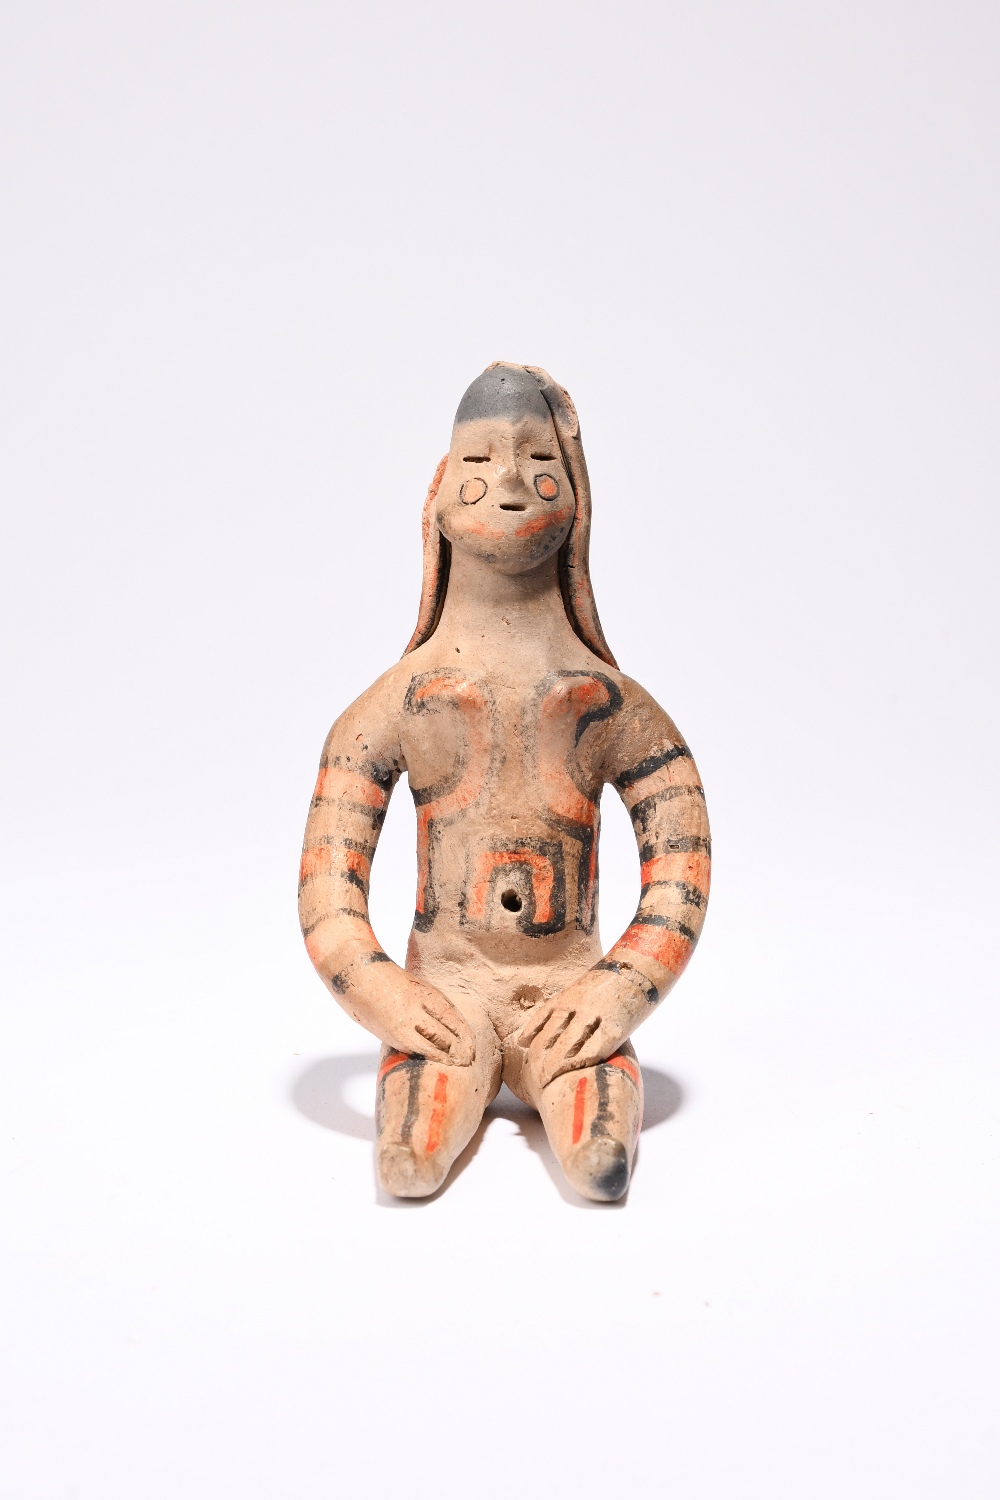 An Amazonian seated female figure Brazil earthenware with red and black decoration, 12cm high. - Image 3 of 3